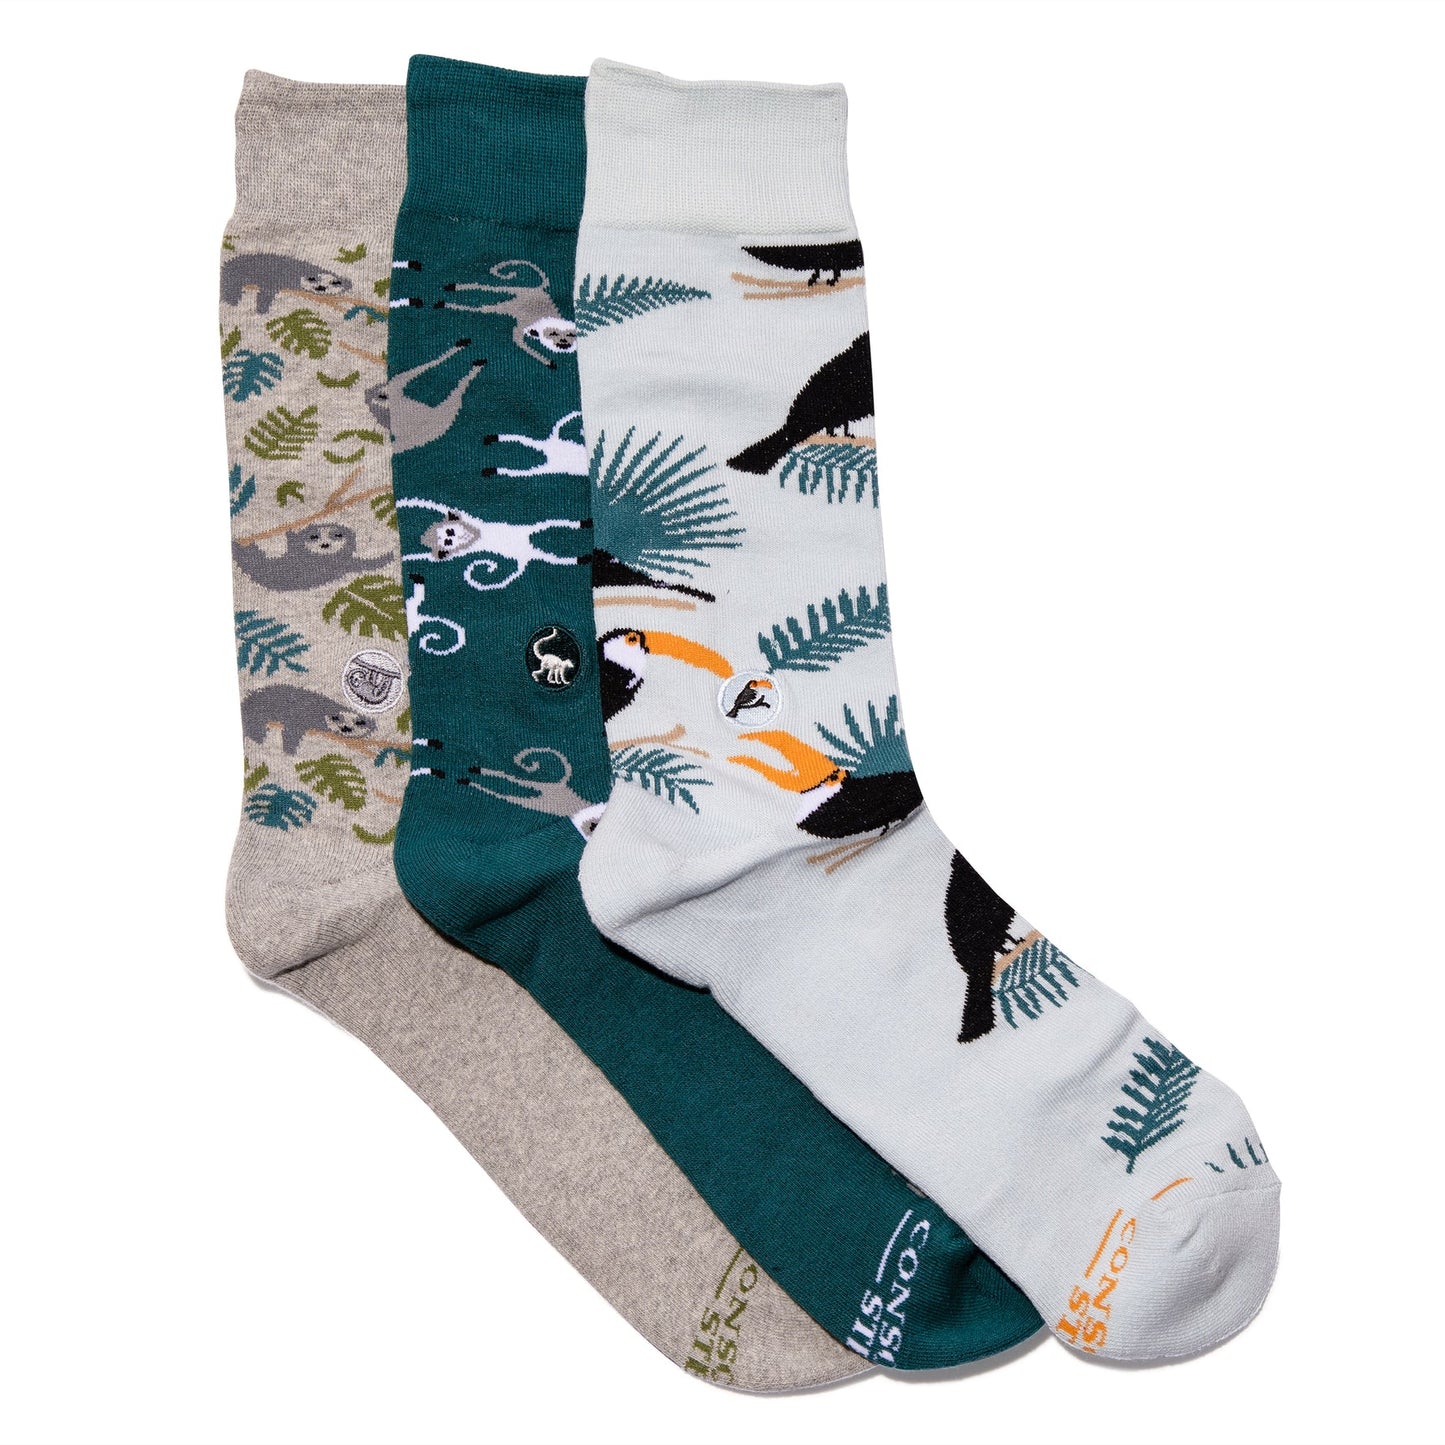 Conscious Step - Gift Box: Socks that protect Rainforests